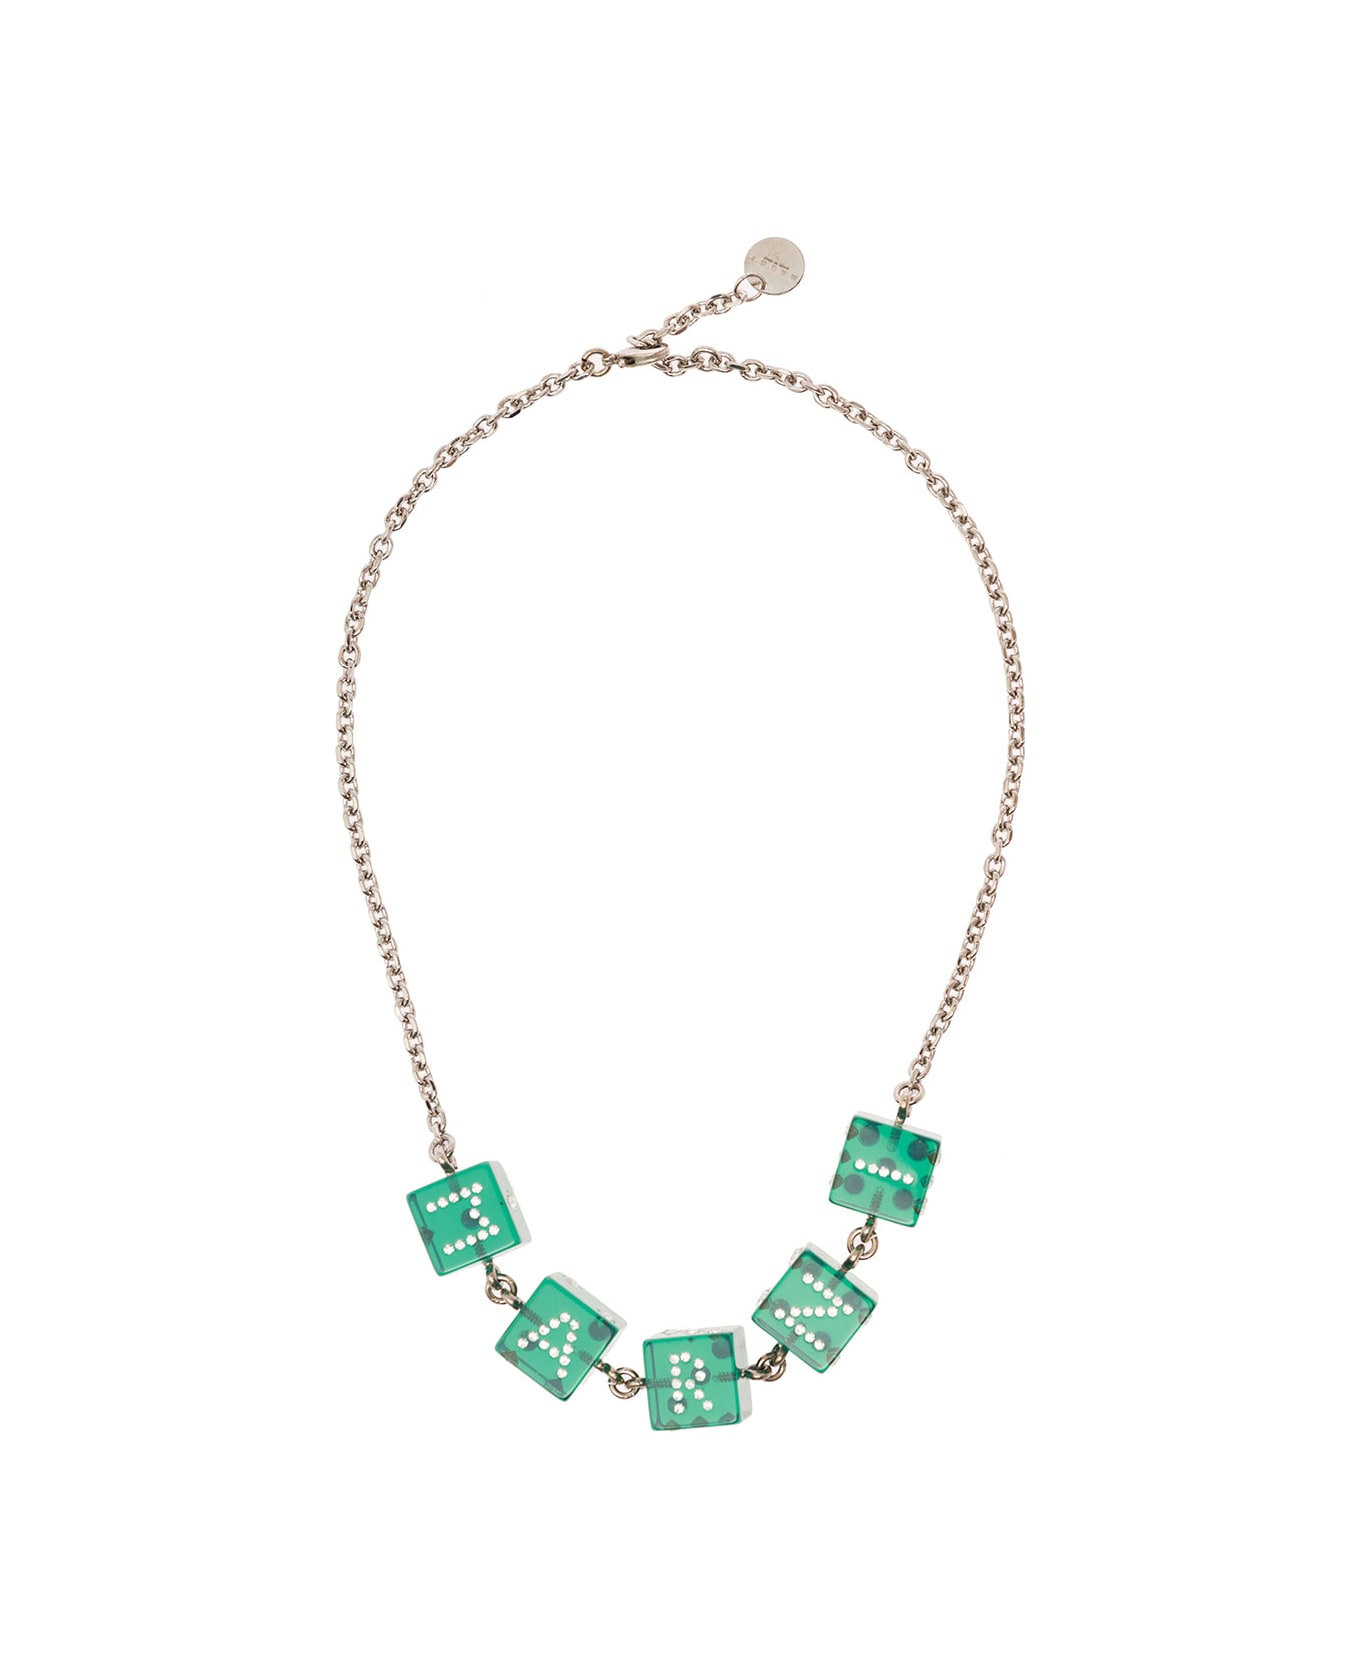 Marni Chain Necklace With Branded Dice-shaped Charms In Green Transparent Resin Woman - Argento/verde ネックレス